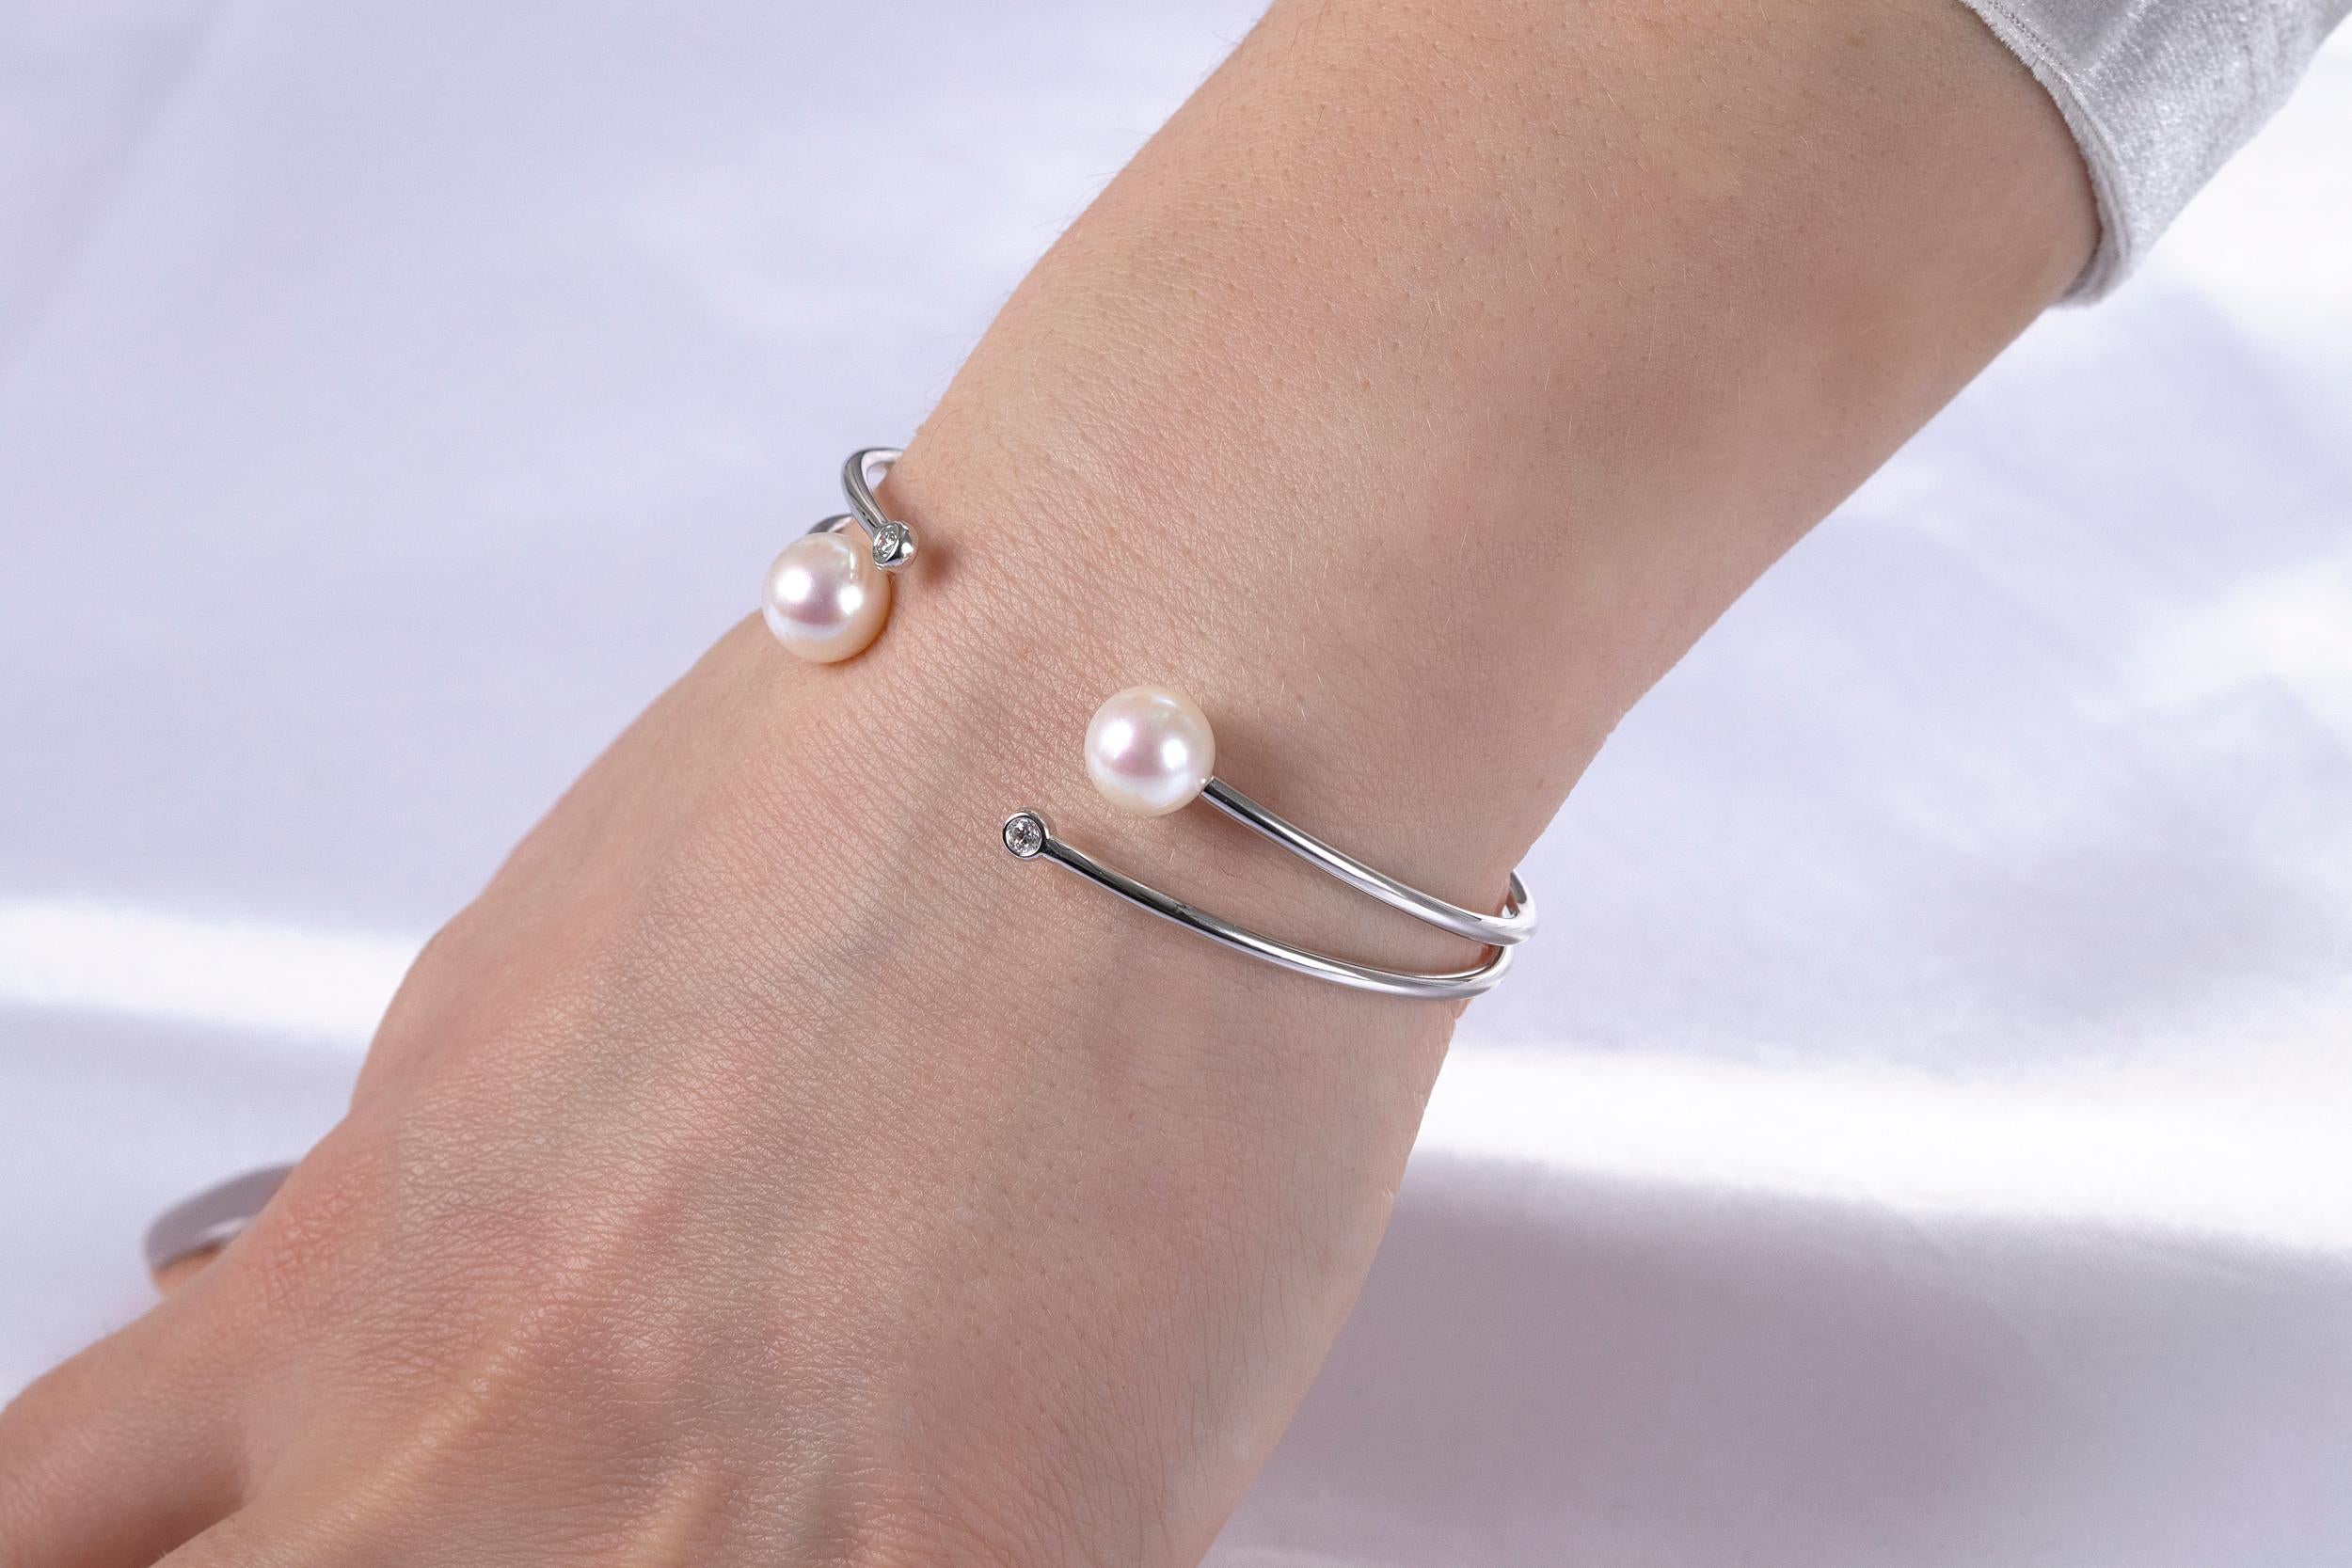 This elegant bangle by Yoko London features lustrous Freshwater pearls accentuated by sparkling white diamonds in an elegant double pronged bangle design. The bangle is crafted with flexibility, allowing it to fit wrist sizes from small (6.5inches)